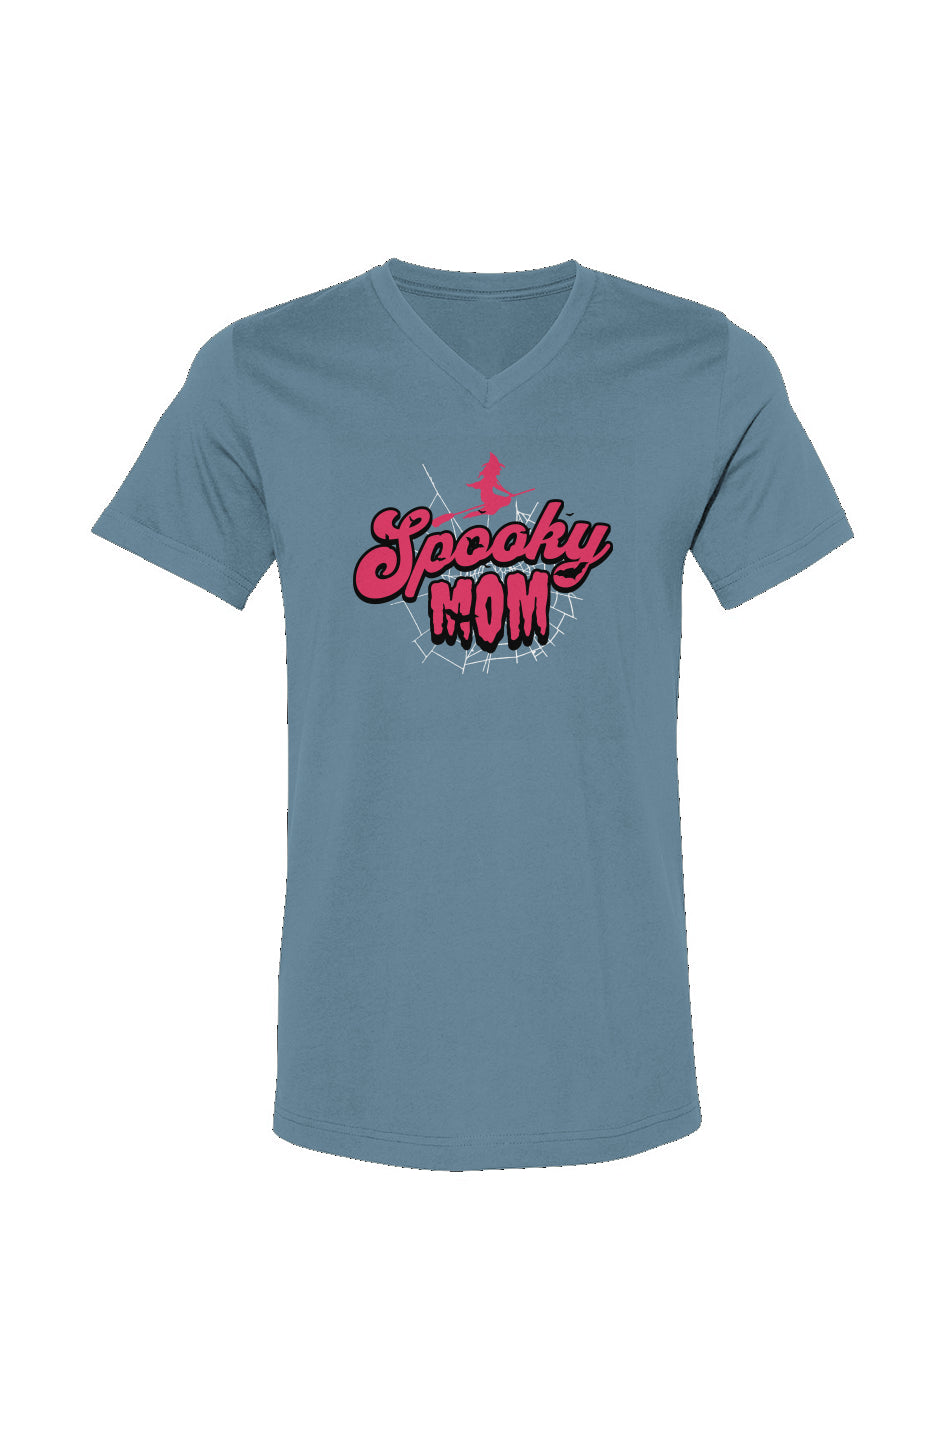 "Spooky Mom" Unisex Fit